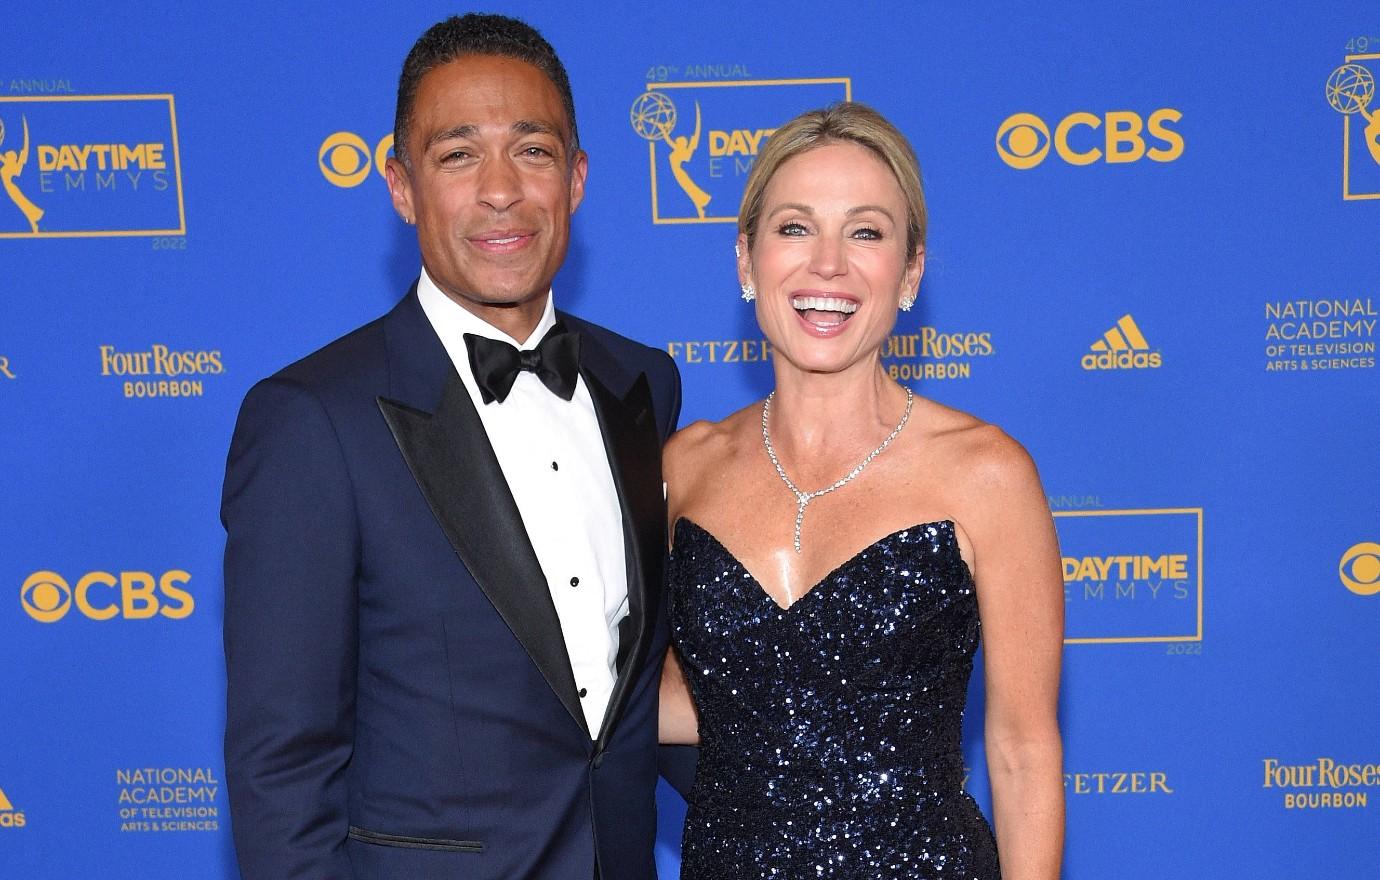 Amy Robach and T.J. Holmes Hold Hands During Bar-Hopping Date Night